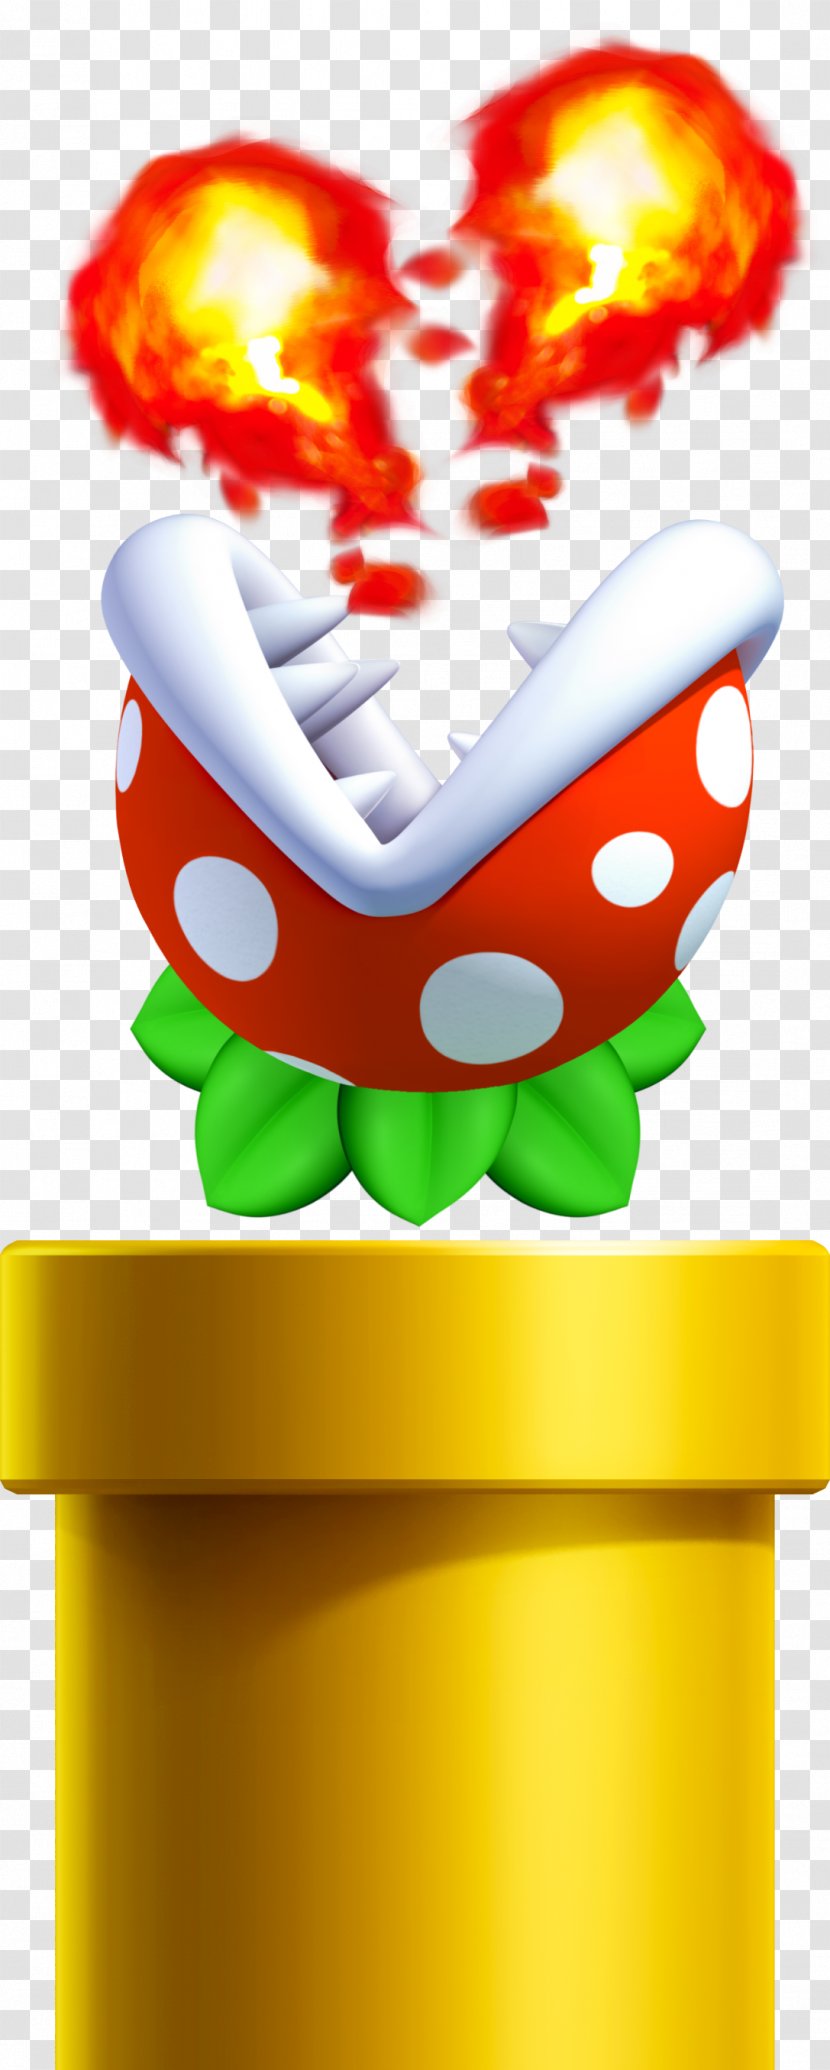 Super Mario World New Bros Bowser Bros. 3 - Yellow - Jumping Castle Transparent PNG